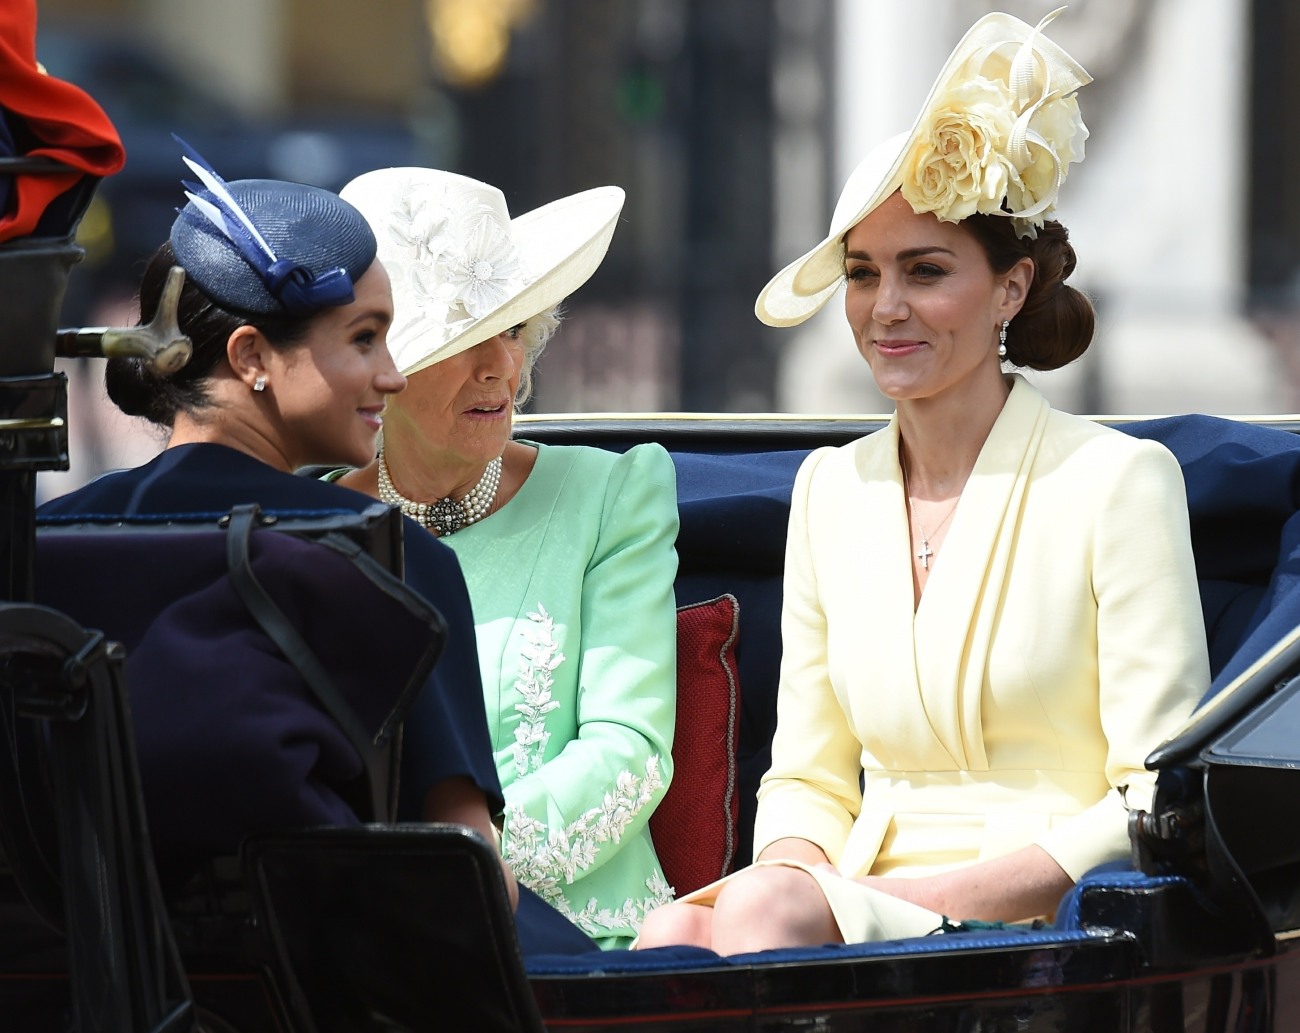 British Royals attend Trooping The Colour - The Queen's official birthday parade